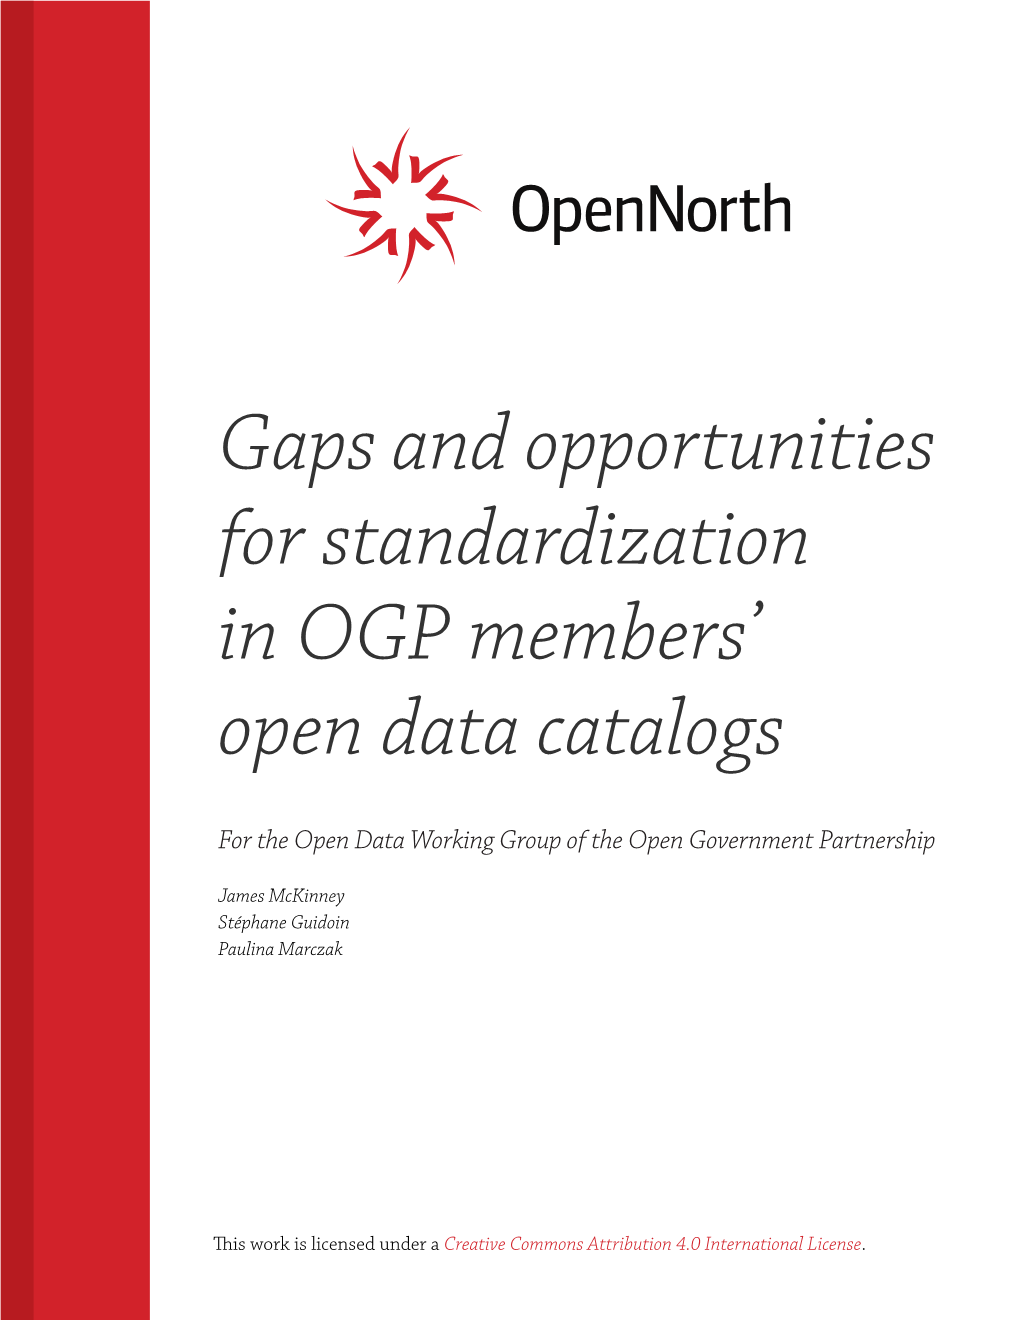 Gaps and Opportunities for Standardization in OGP Members’ Open Data Catalogs